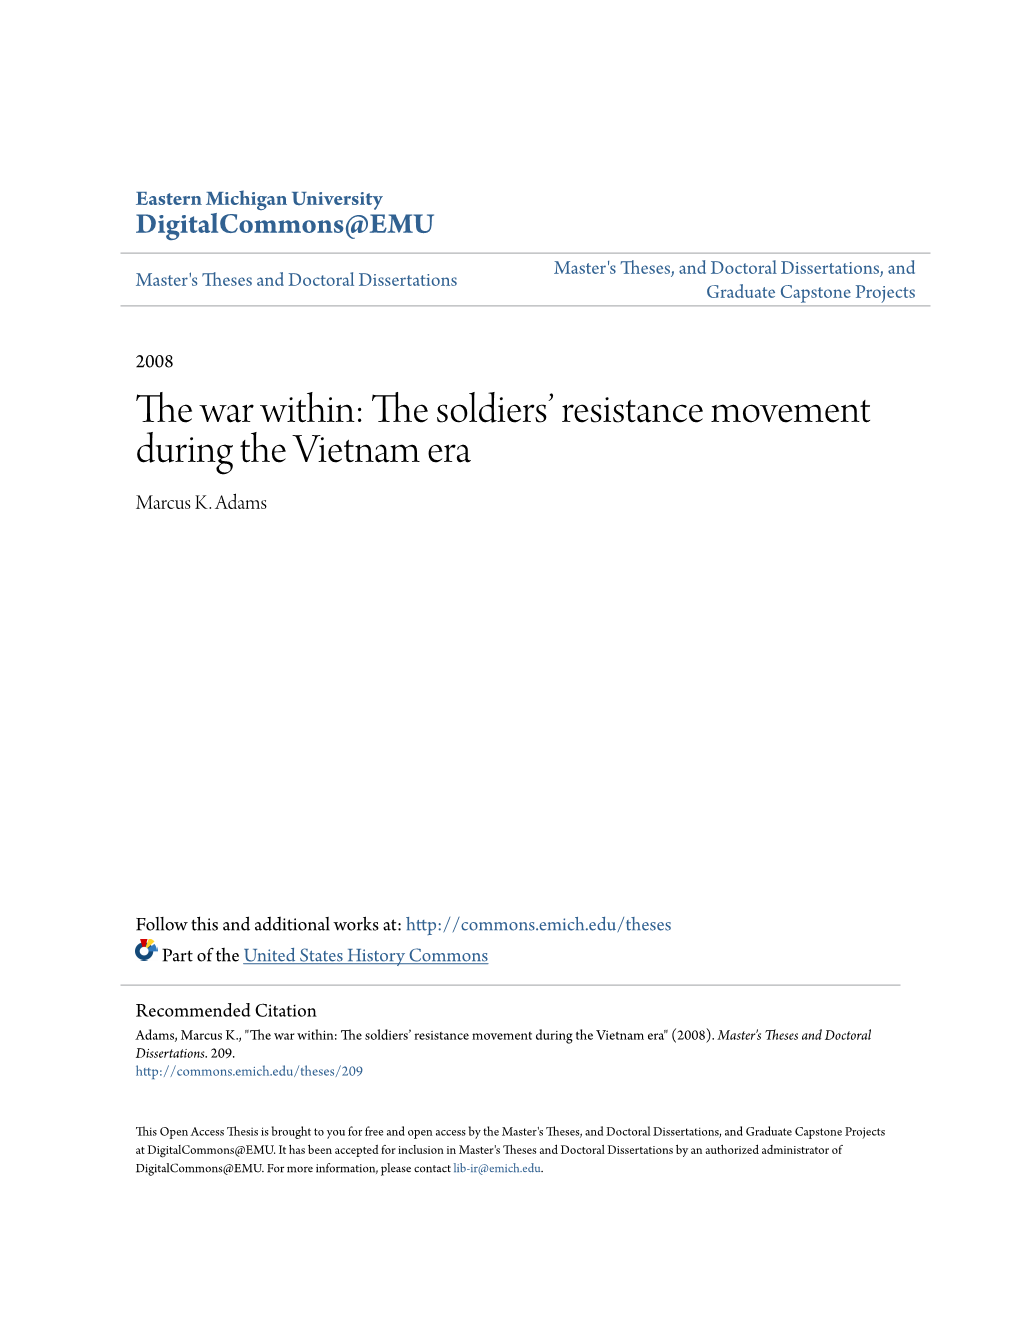 The Soldiers' Resistance Movement During the Vietnam